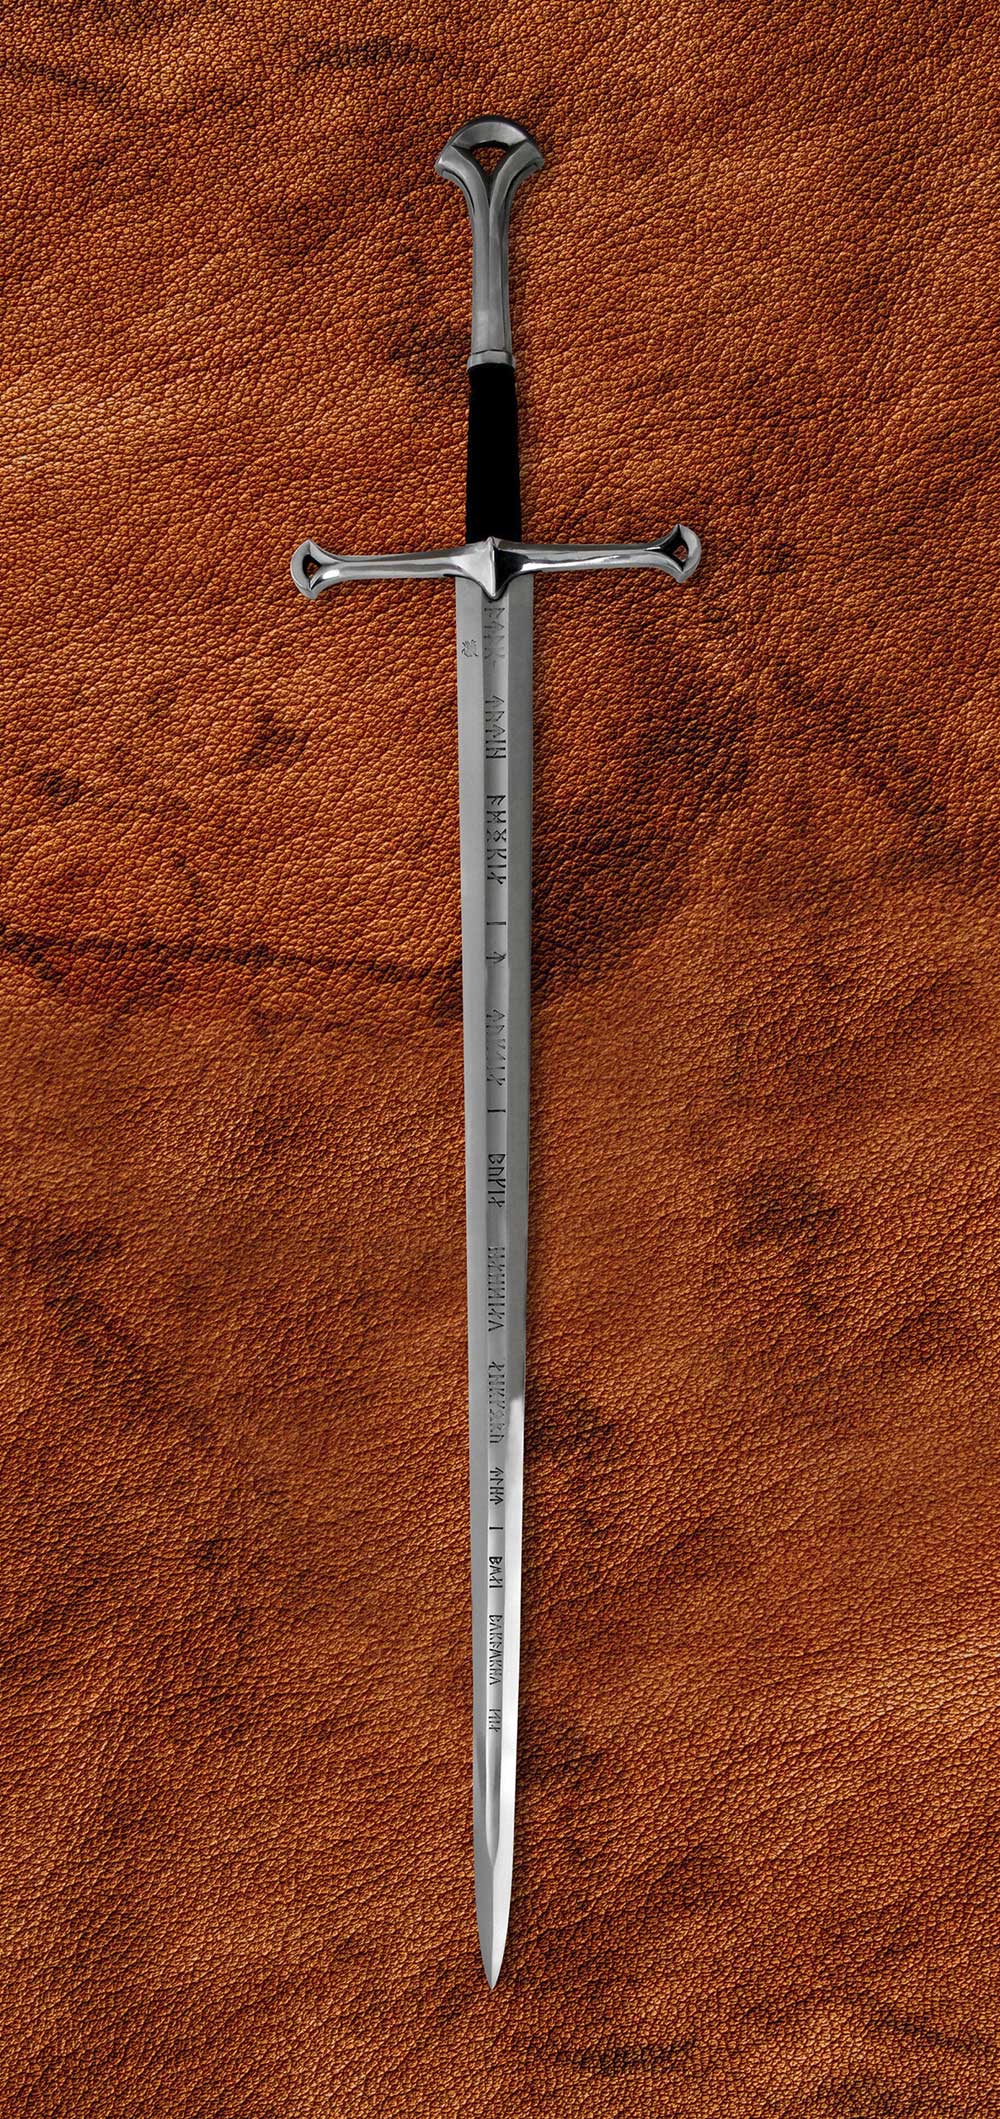 lord of the rings sword